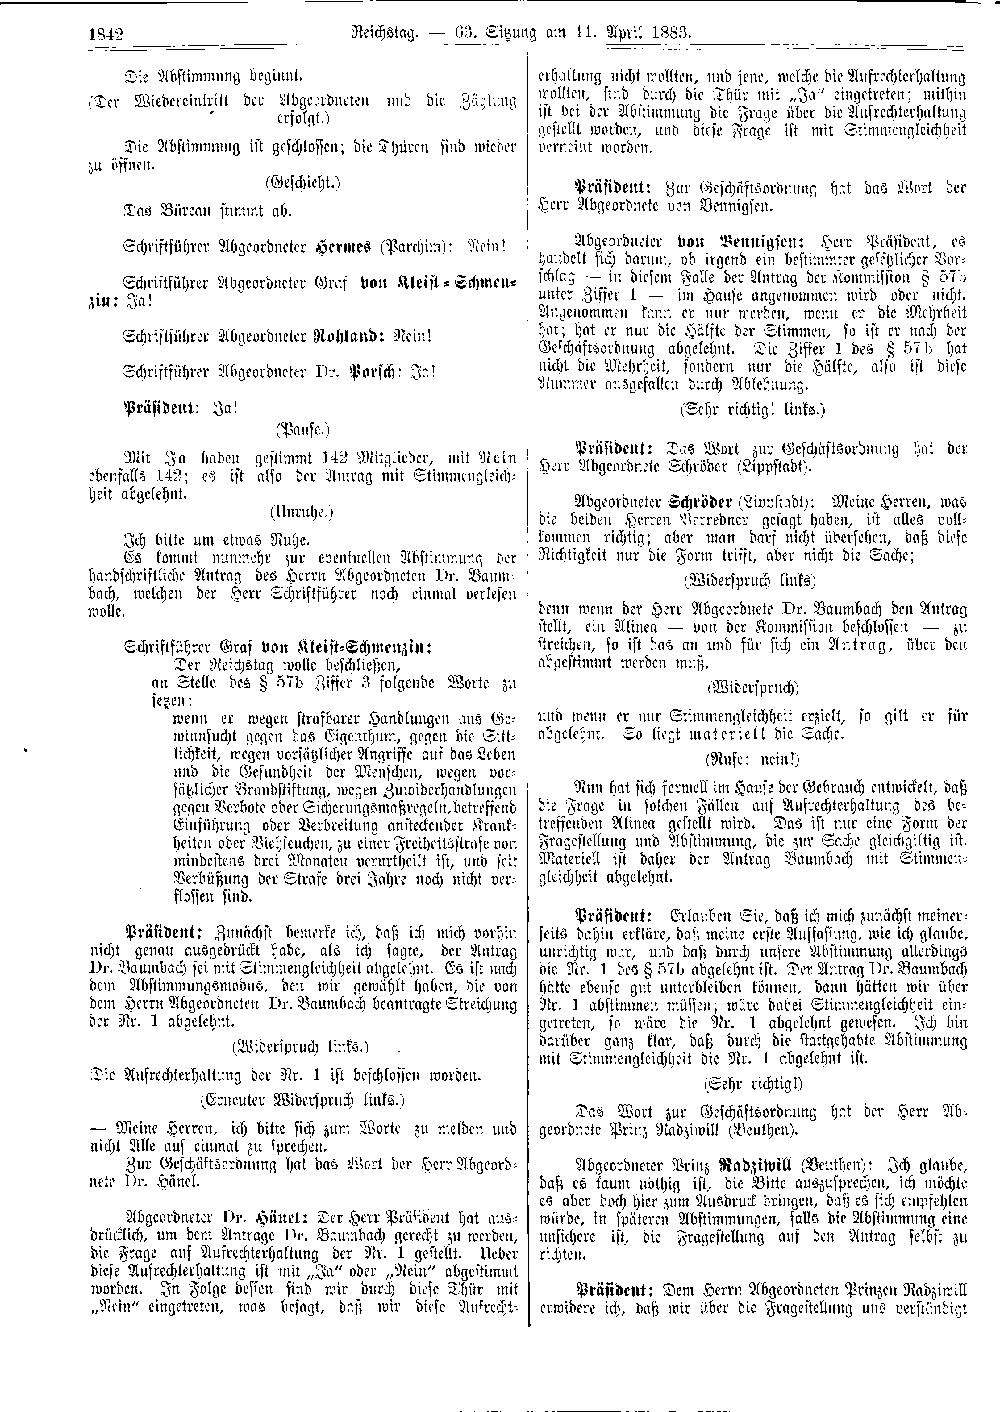 Scan of page 1842